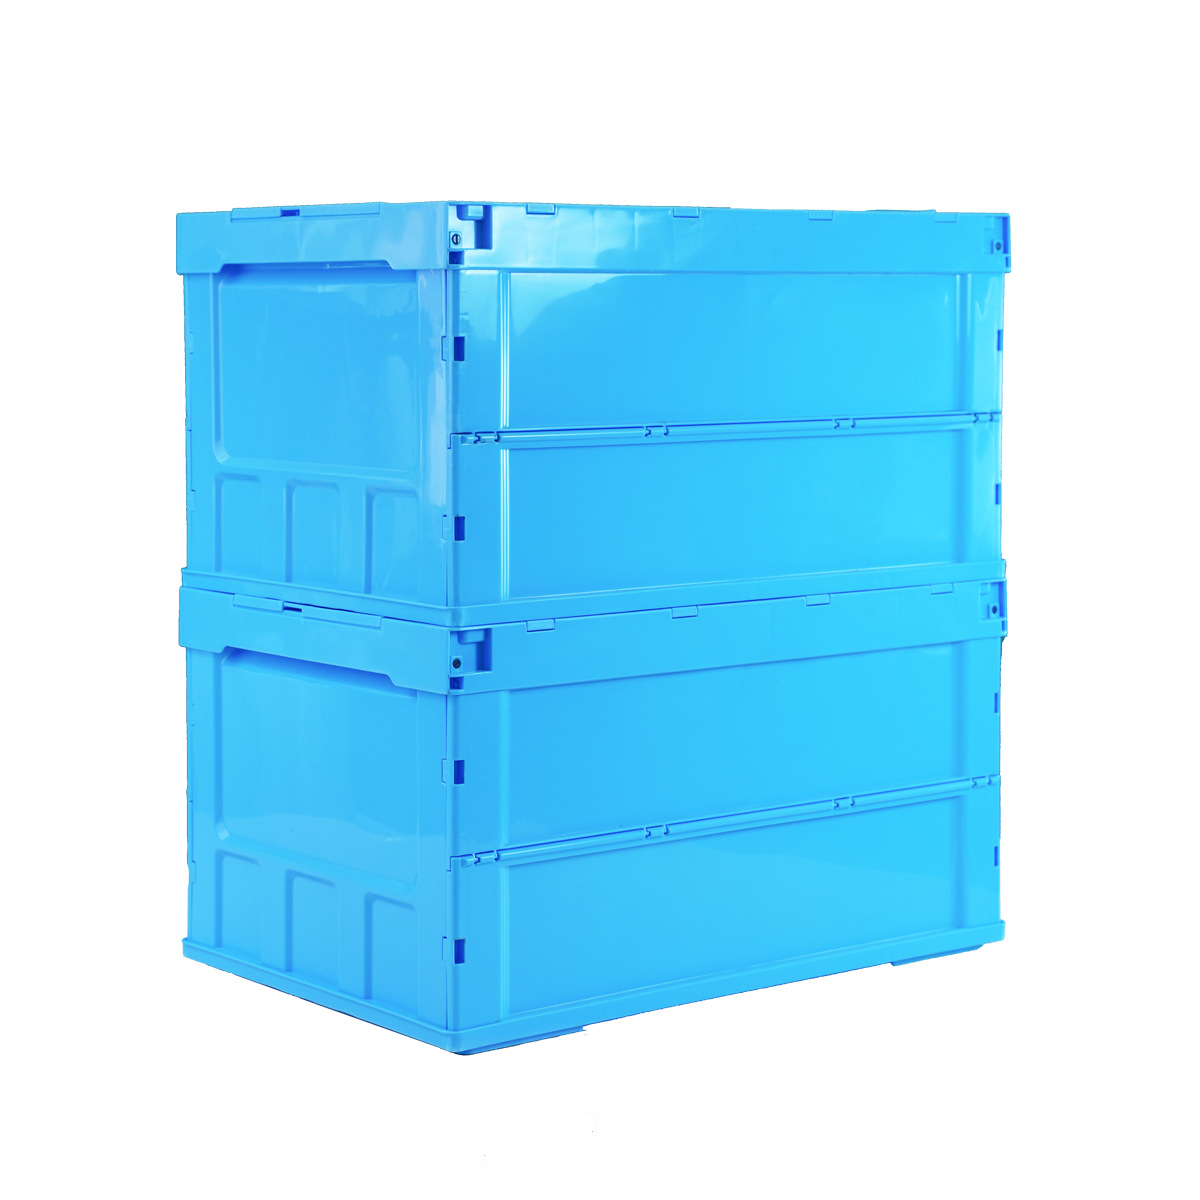 Oblique Insertion Foldable Logistics Box with Lid Plastic Storage Box Blue Food Industrial Storage Non-Airtight Crate